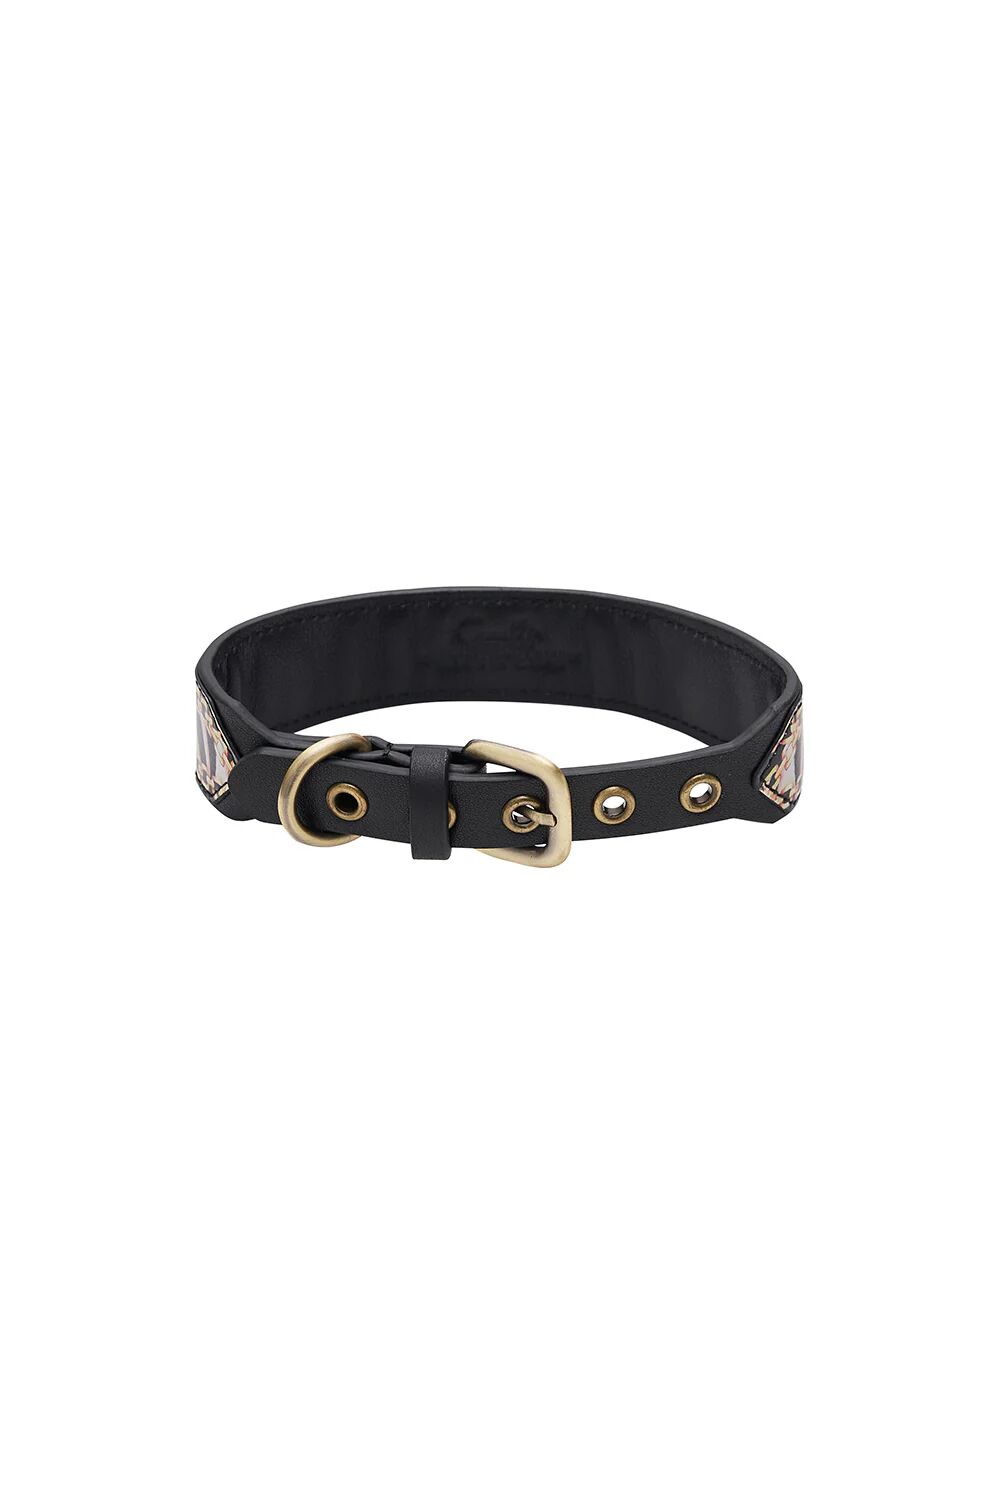 Camilla eBoutique Dog Collar a Night in the 90S, S/M  - Size: S/M